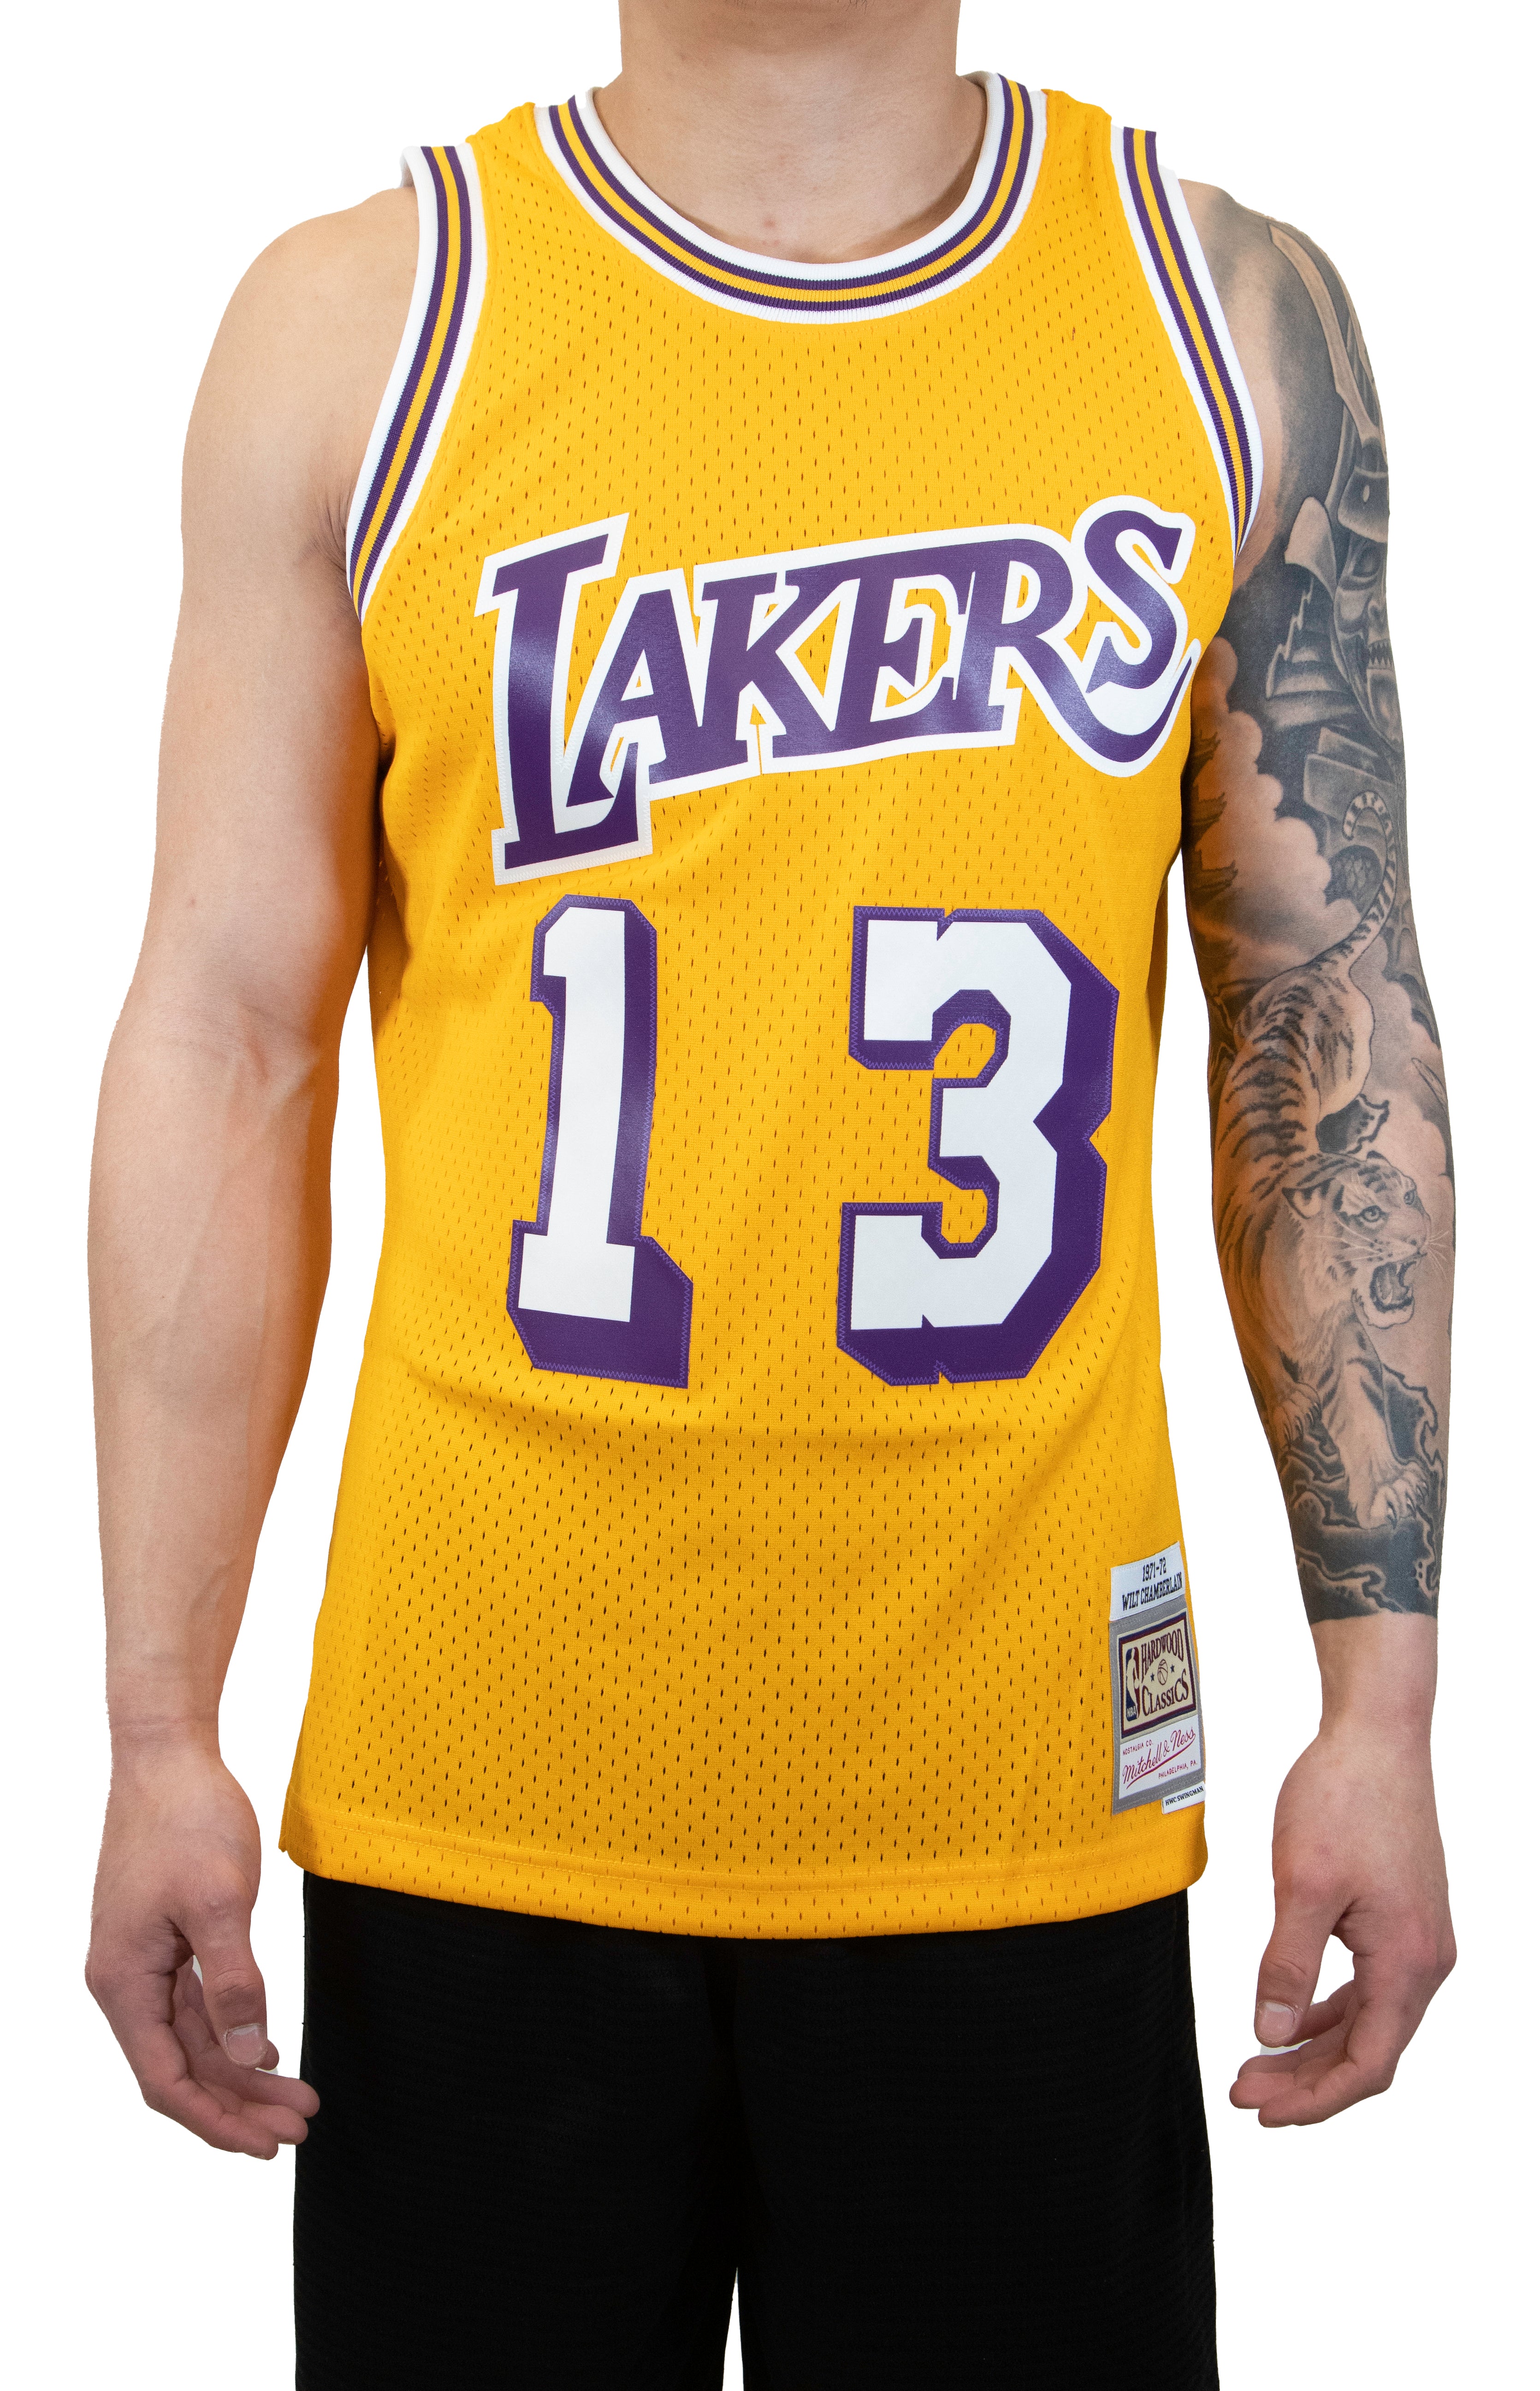 Lakers Jerseys for sale in Charleston, South Carolina